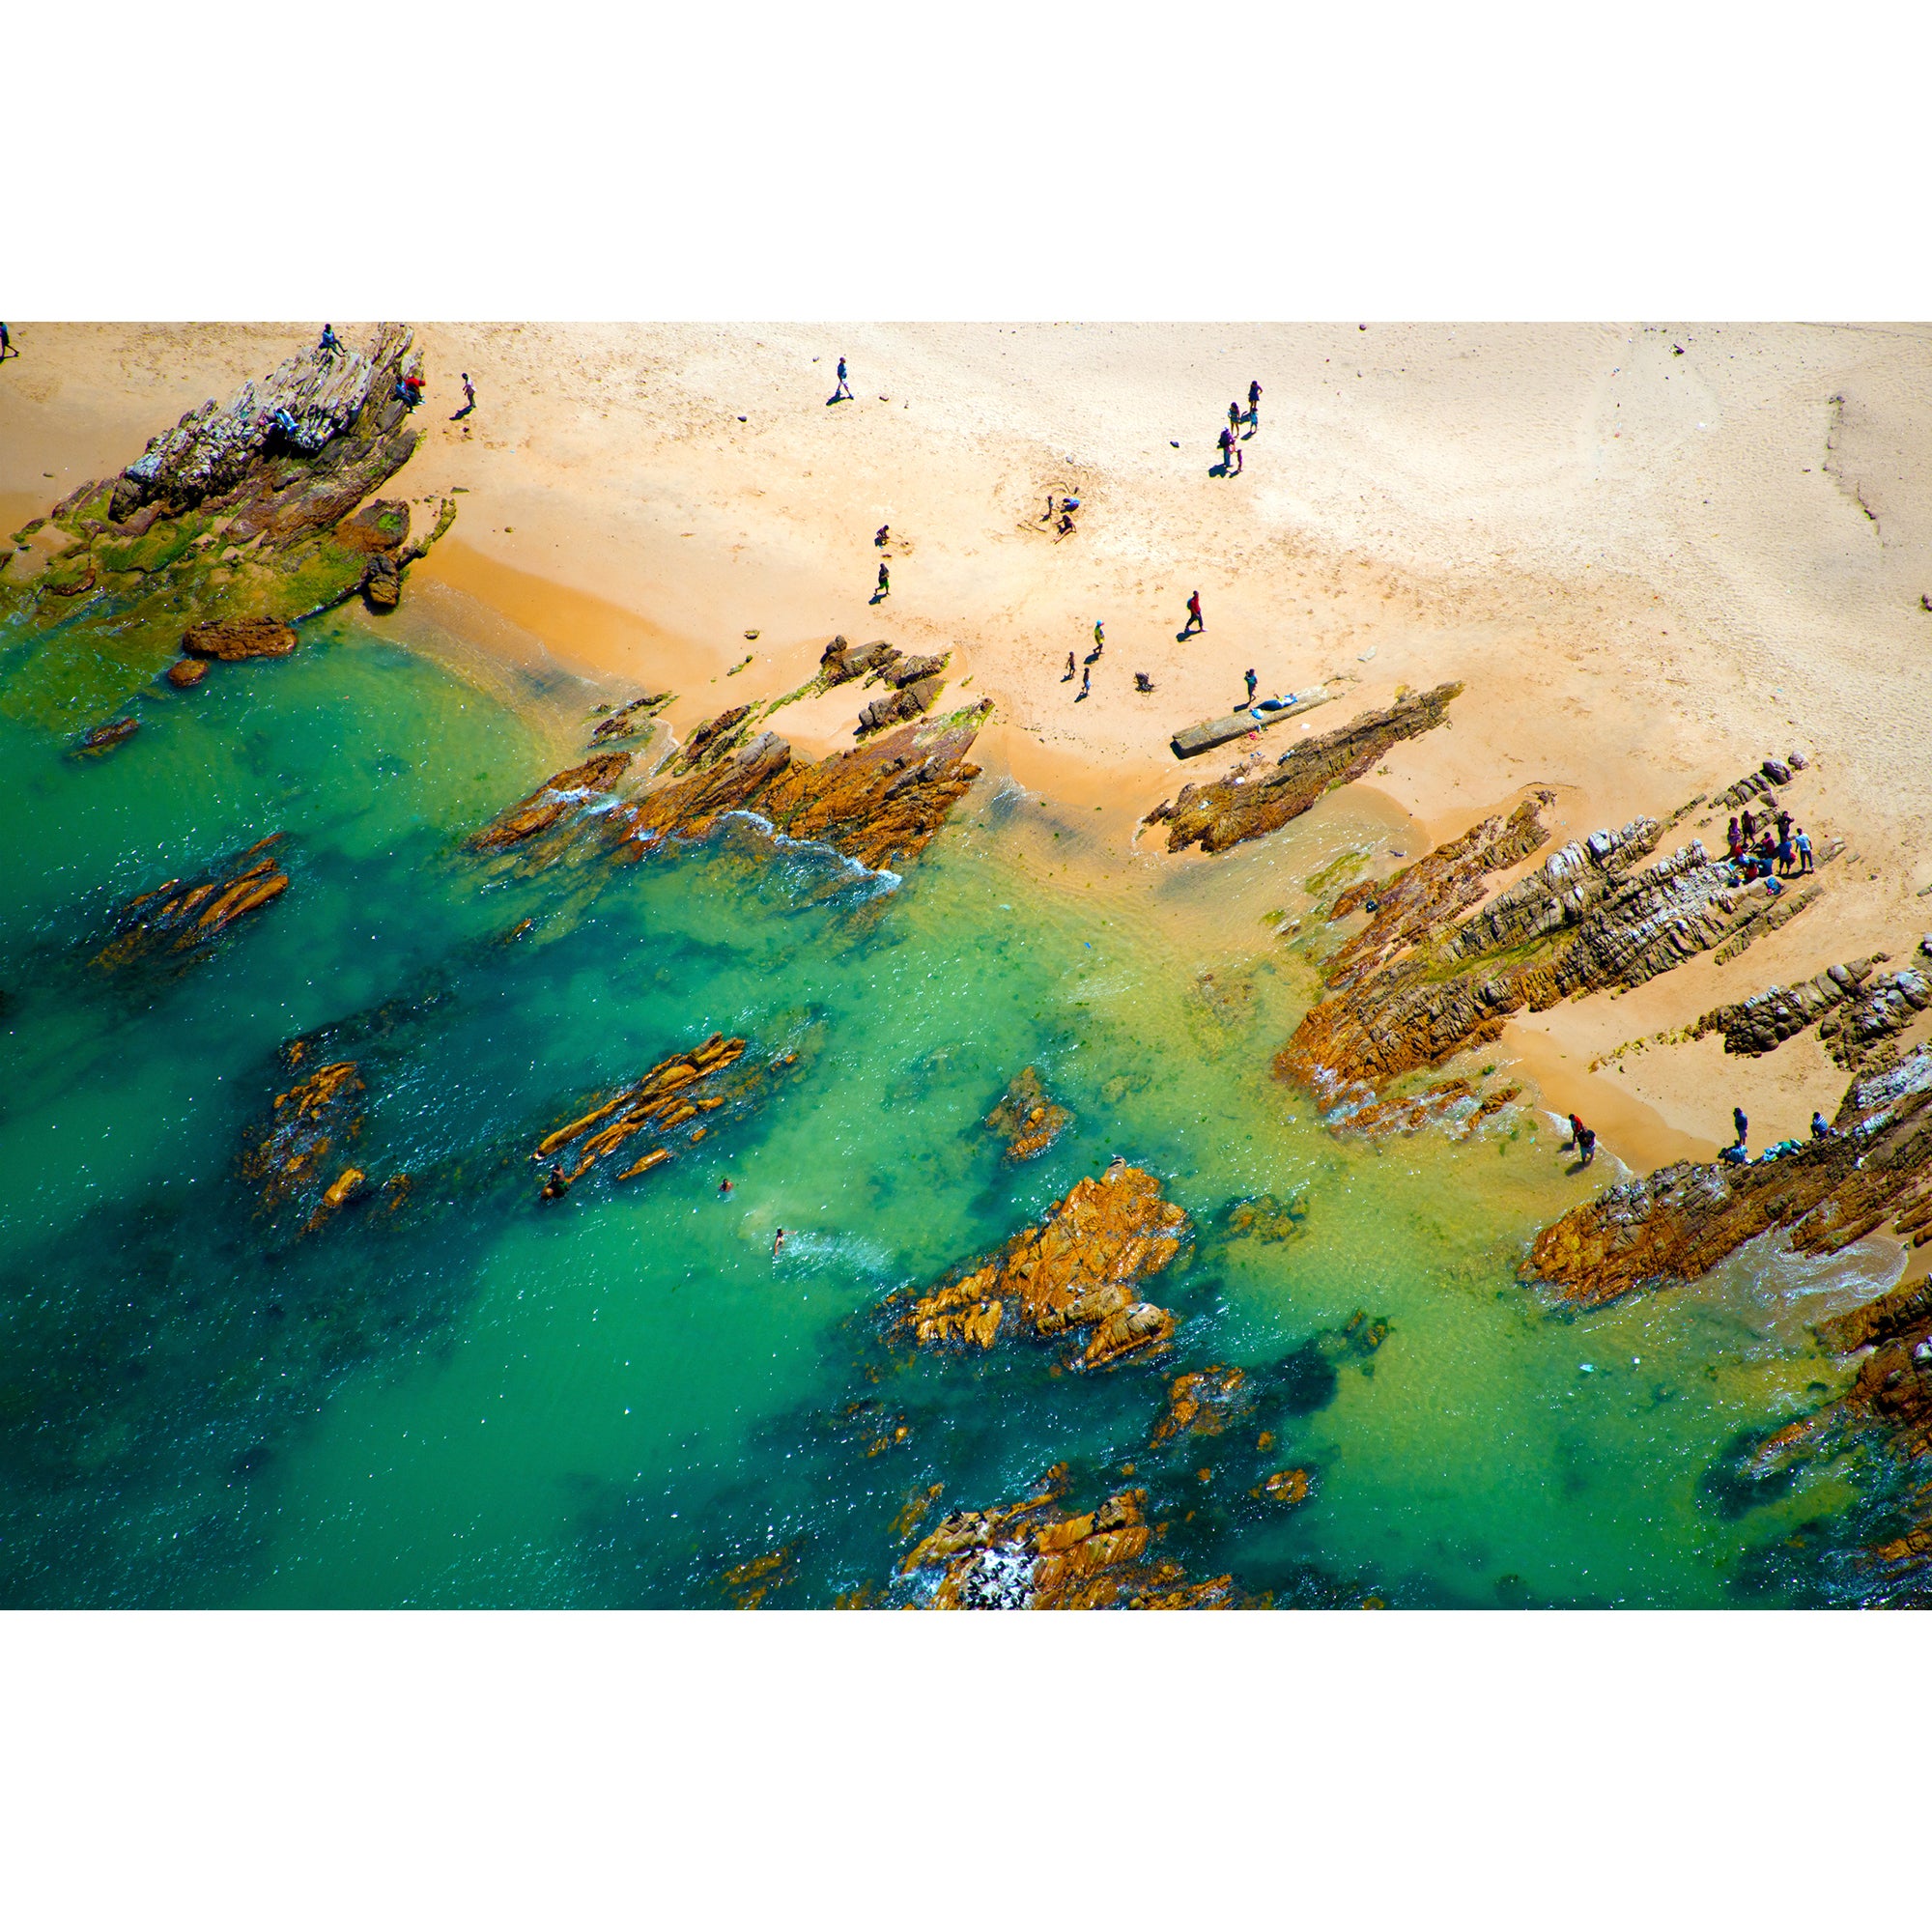 17 Breathtaking Aerial Beach Photos That Will Make You Want to Travel Right Now
